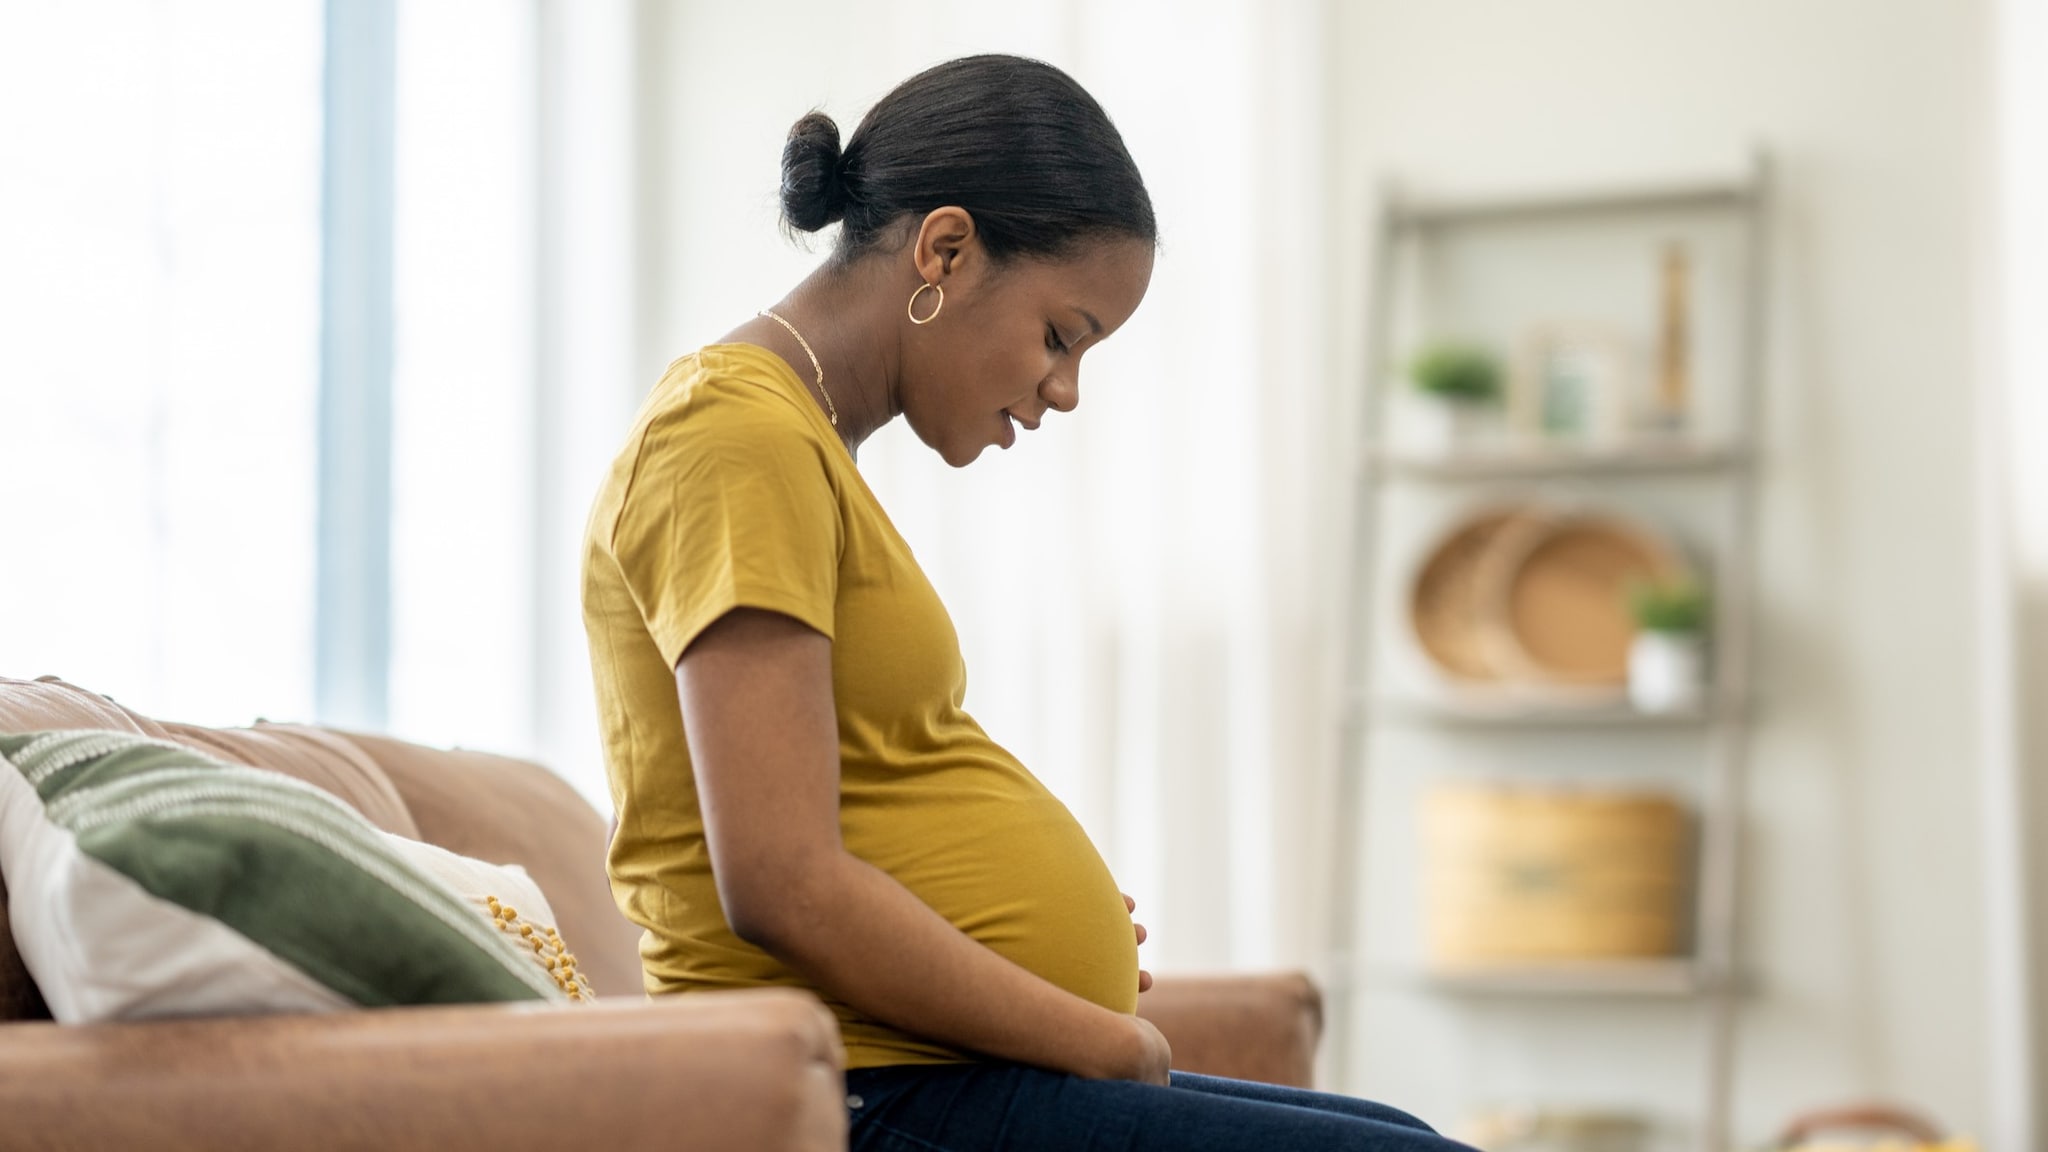 Pregnant person in a yellow shirt sitting on a couch looking at their stomach.